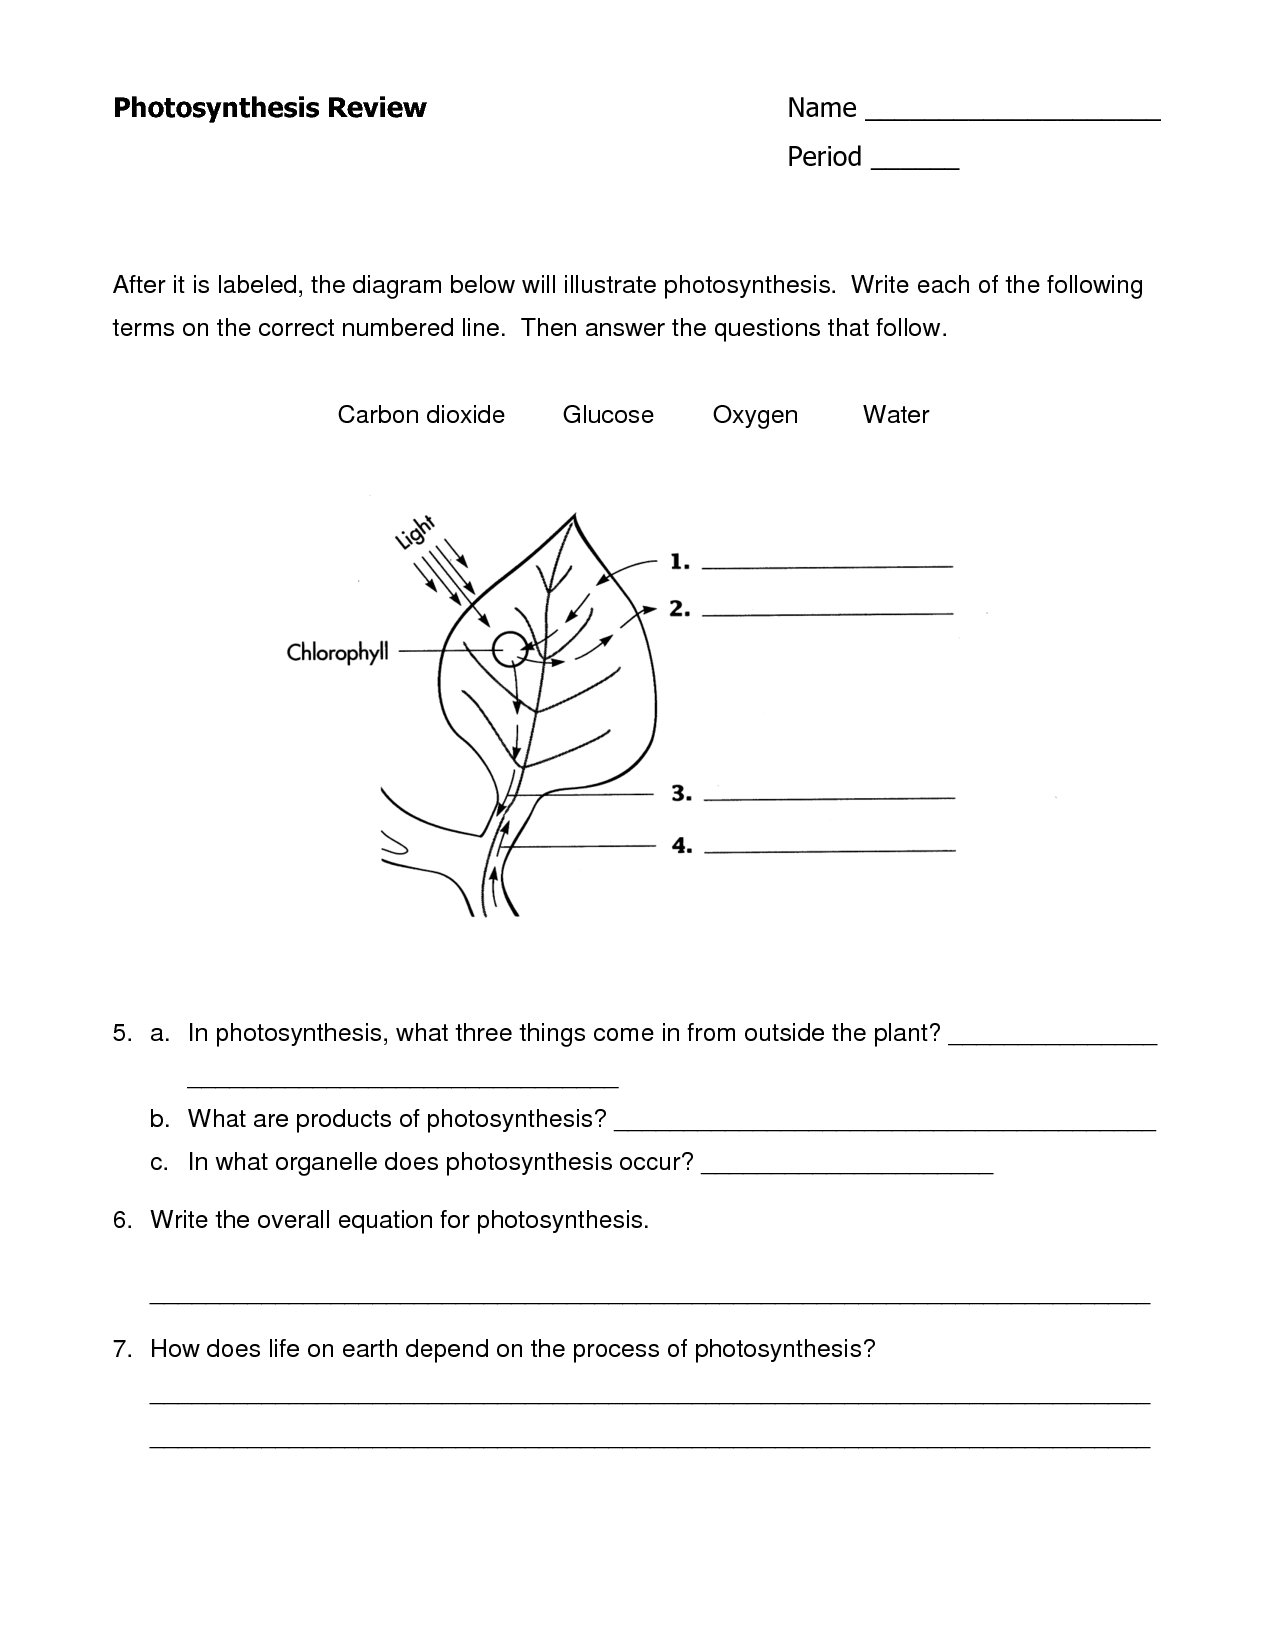 Photosynthesis Diagrams Worksheet Answers